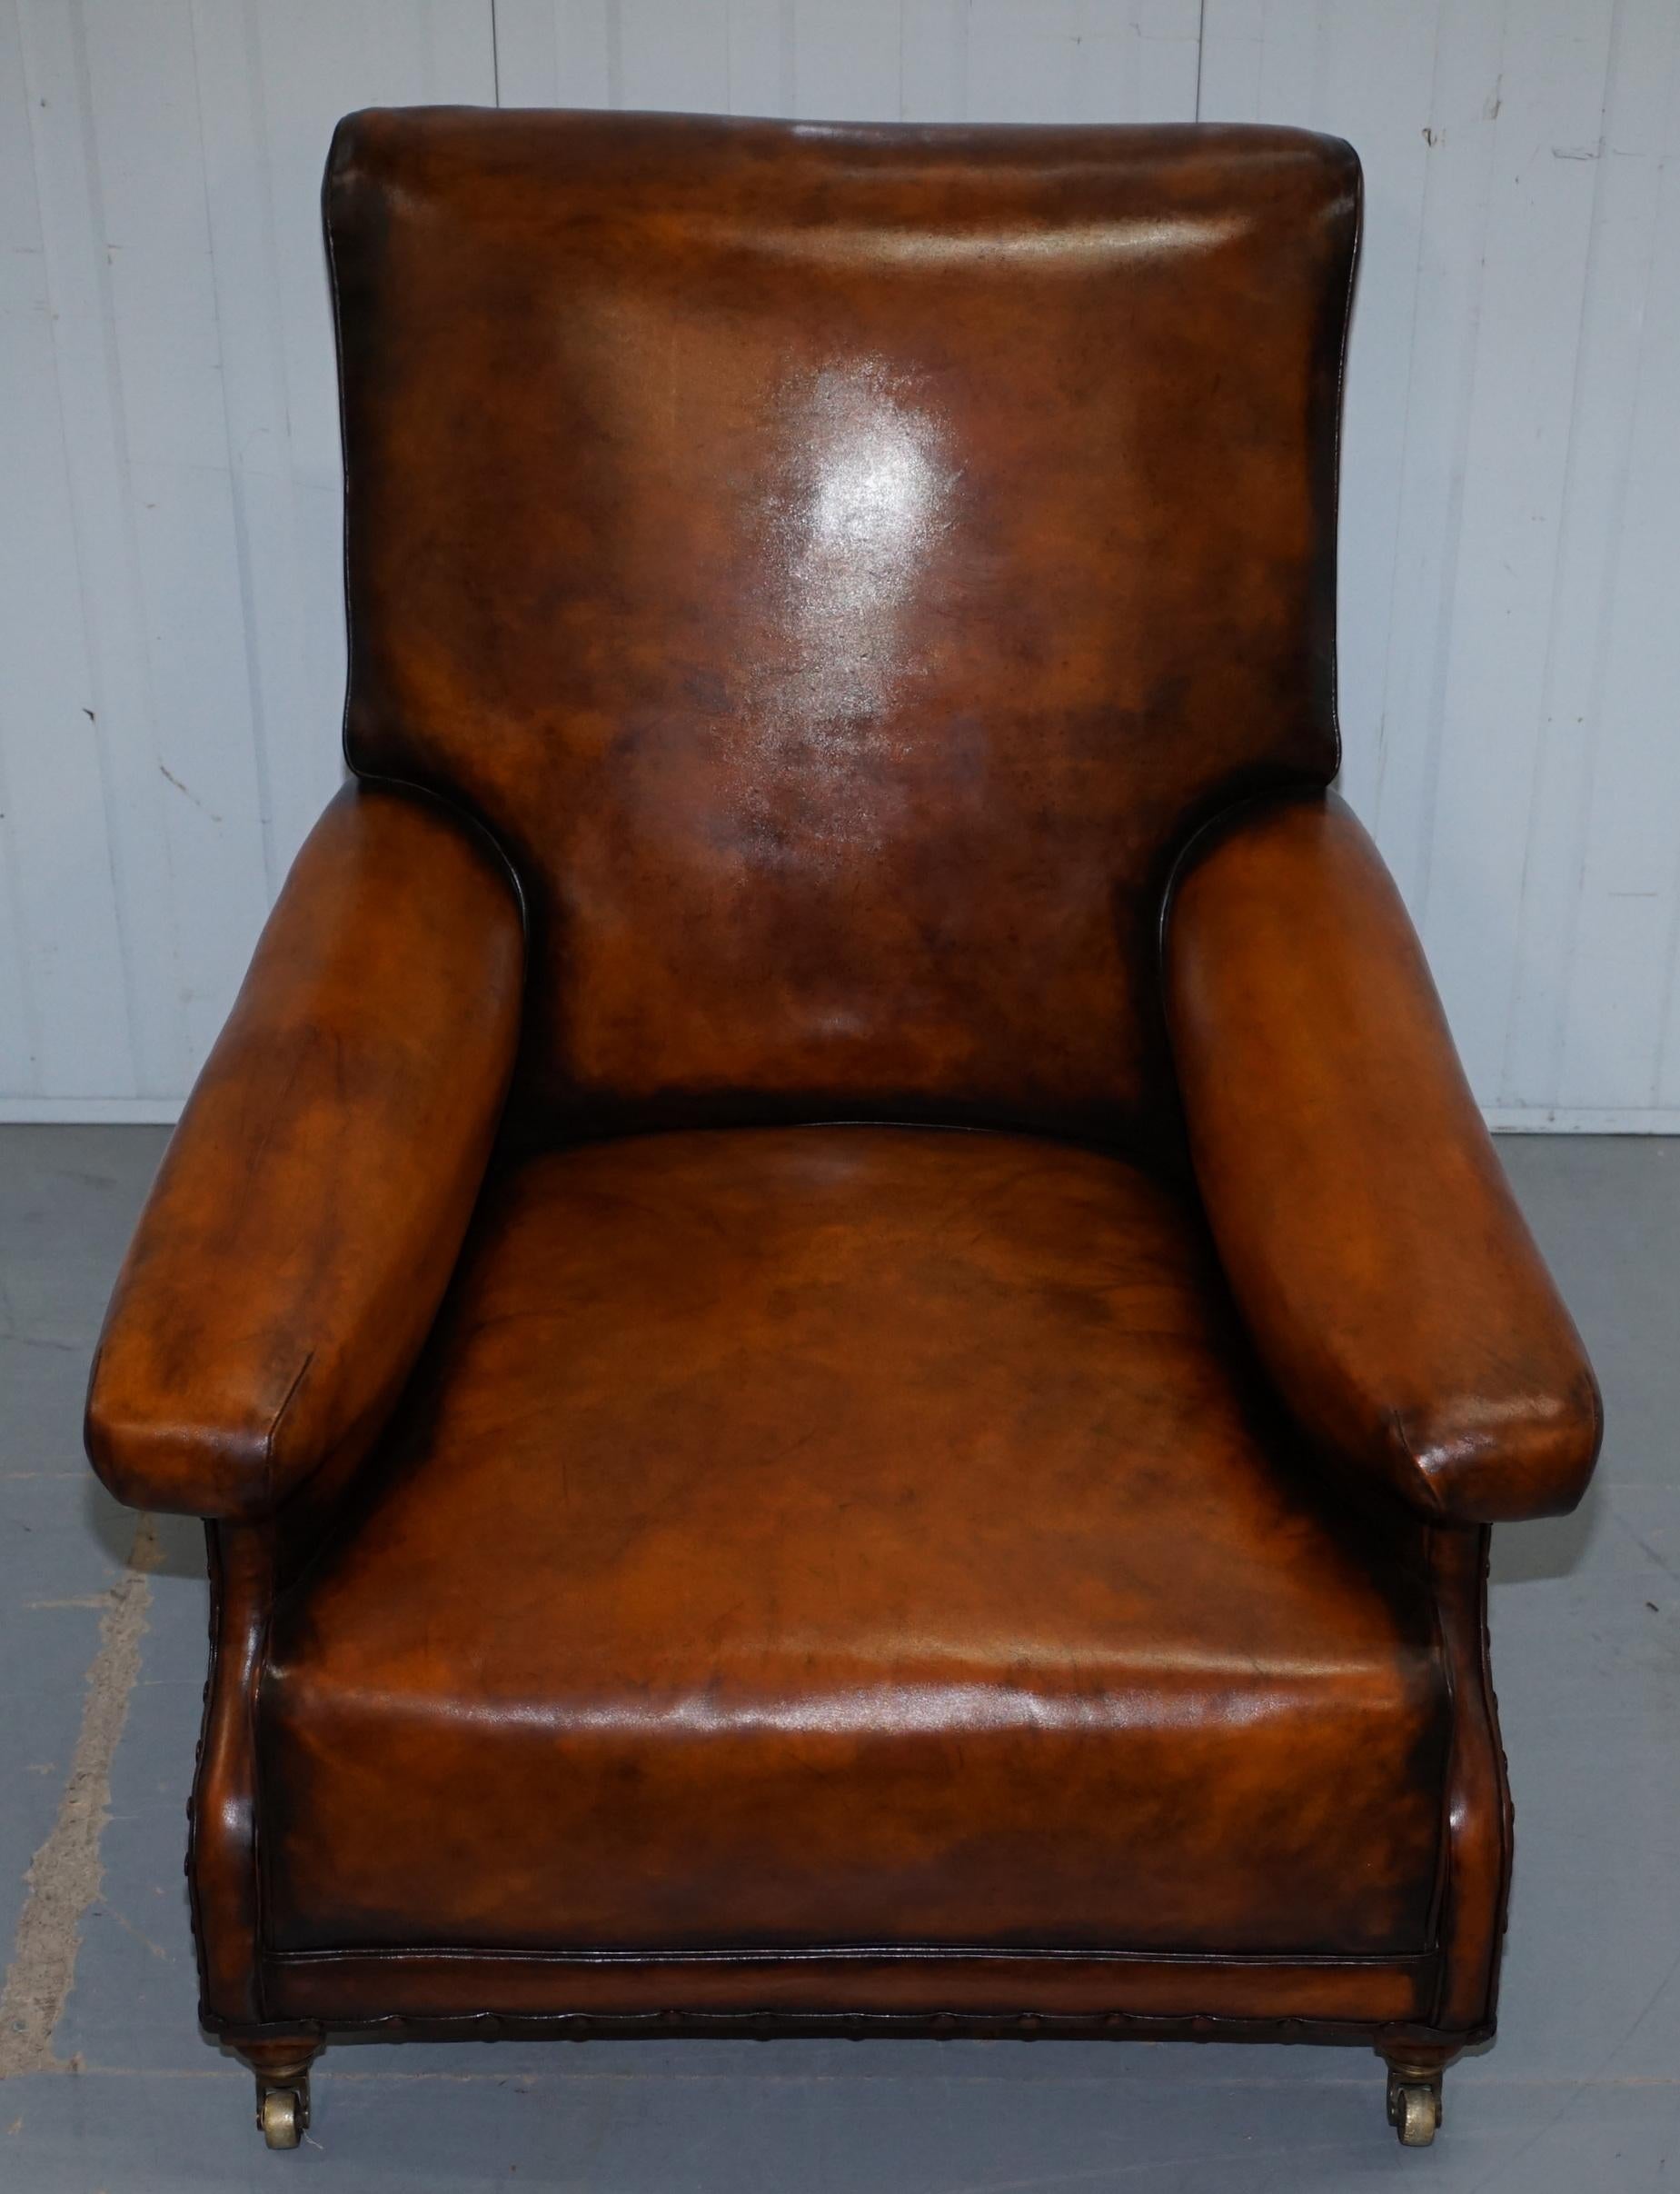 Hand-Crafted Fully Stamped Original Victorian Walnut & Brown Leather Howard & Son's Armchair